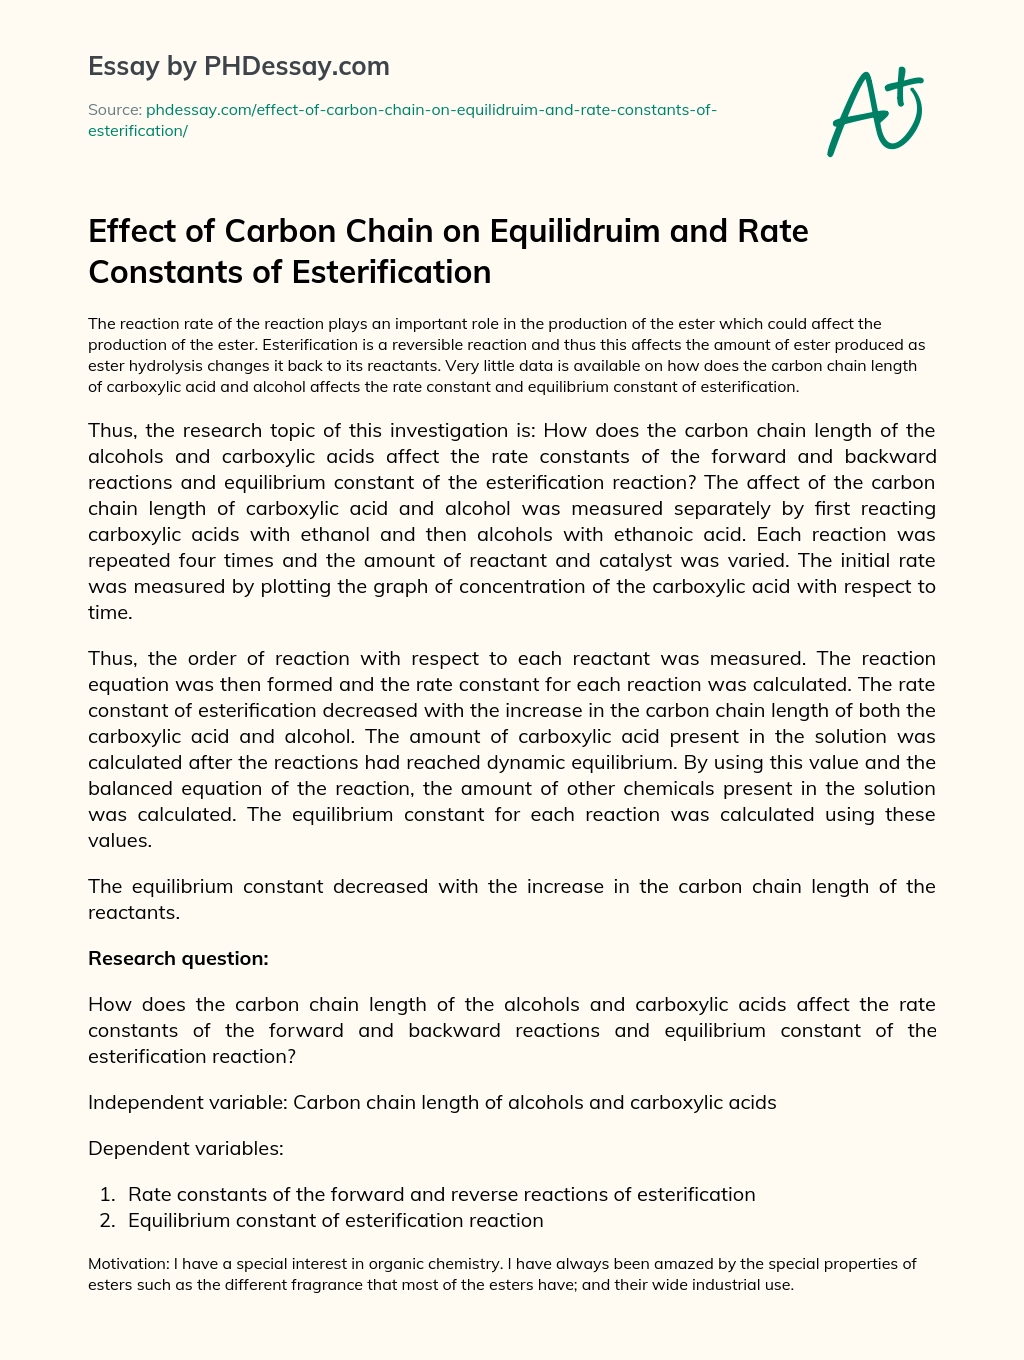 Effect of Carbon Chain on Equilidruim and Rate Constants of Esterification essay